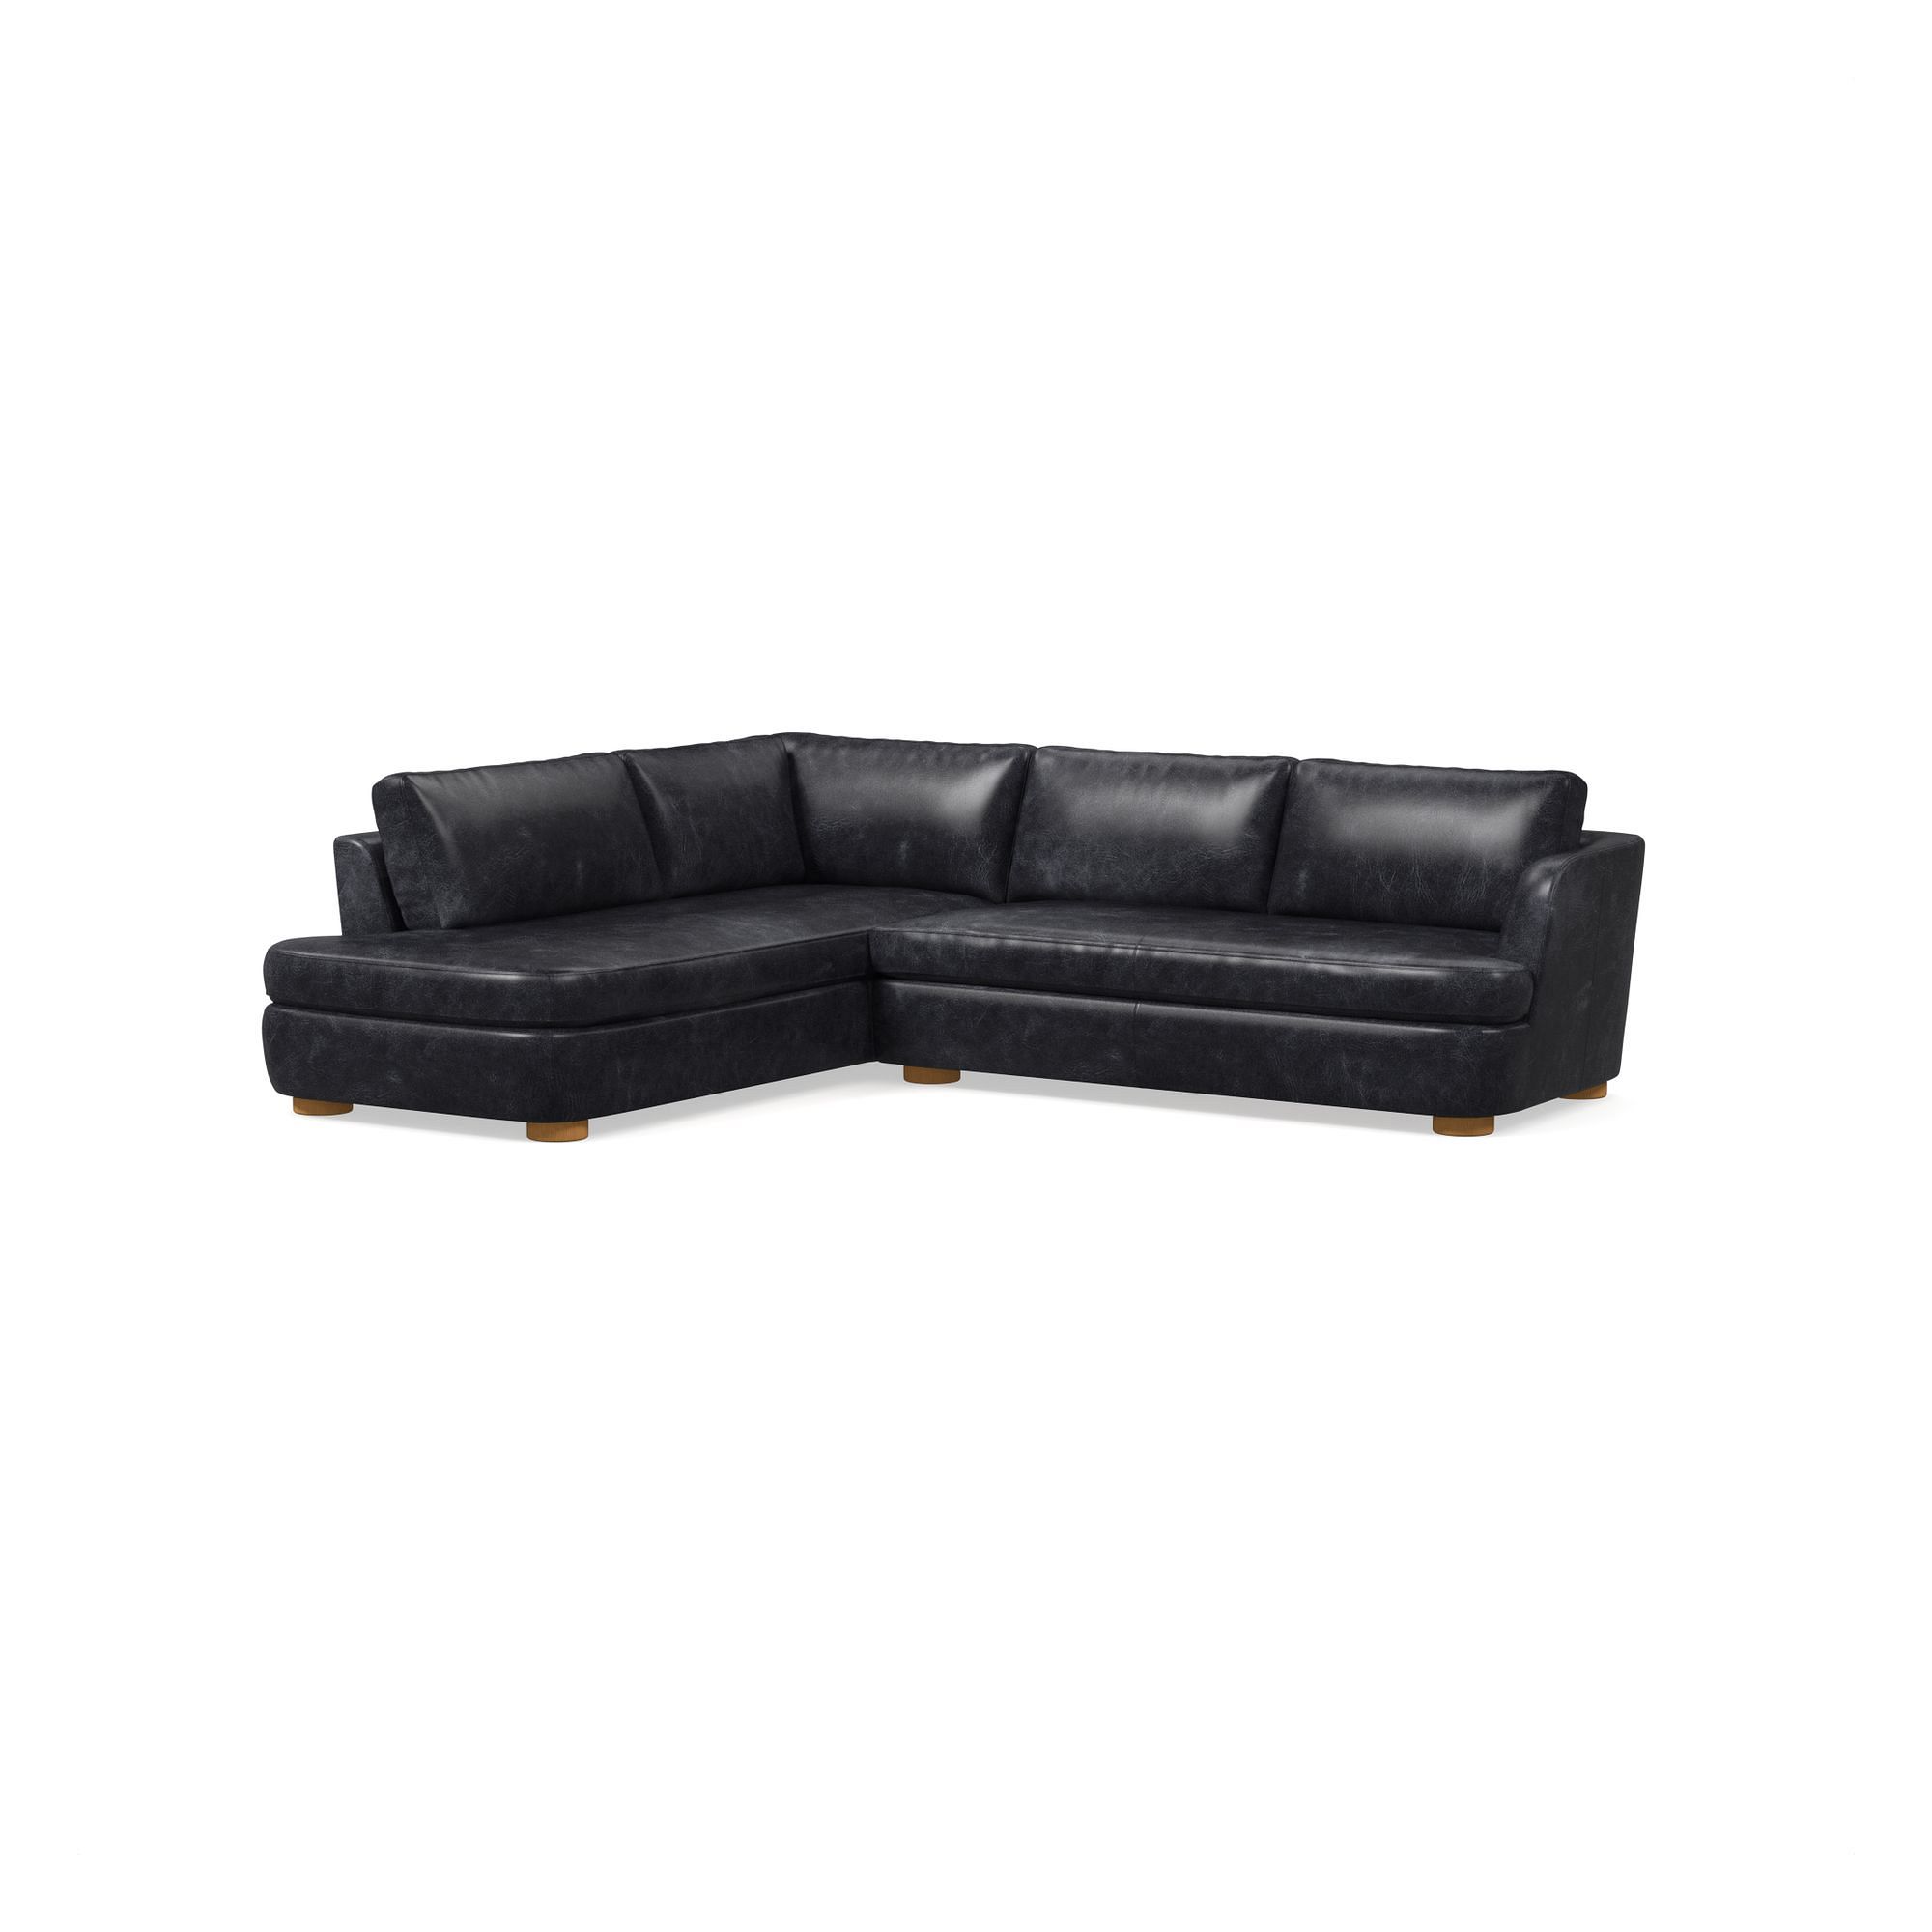 Leroy Leather 2-Piece Bumper Chaise Sectional (110.5") | West Elm